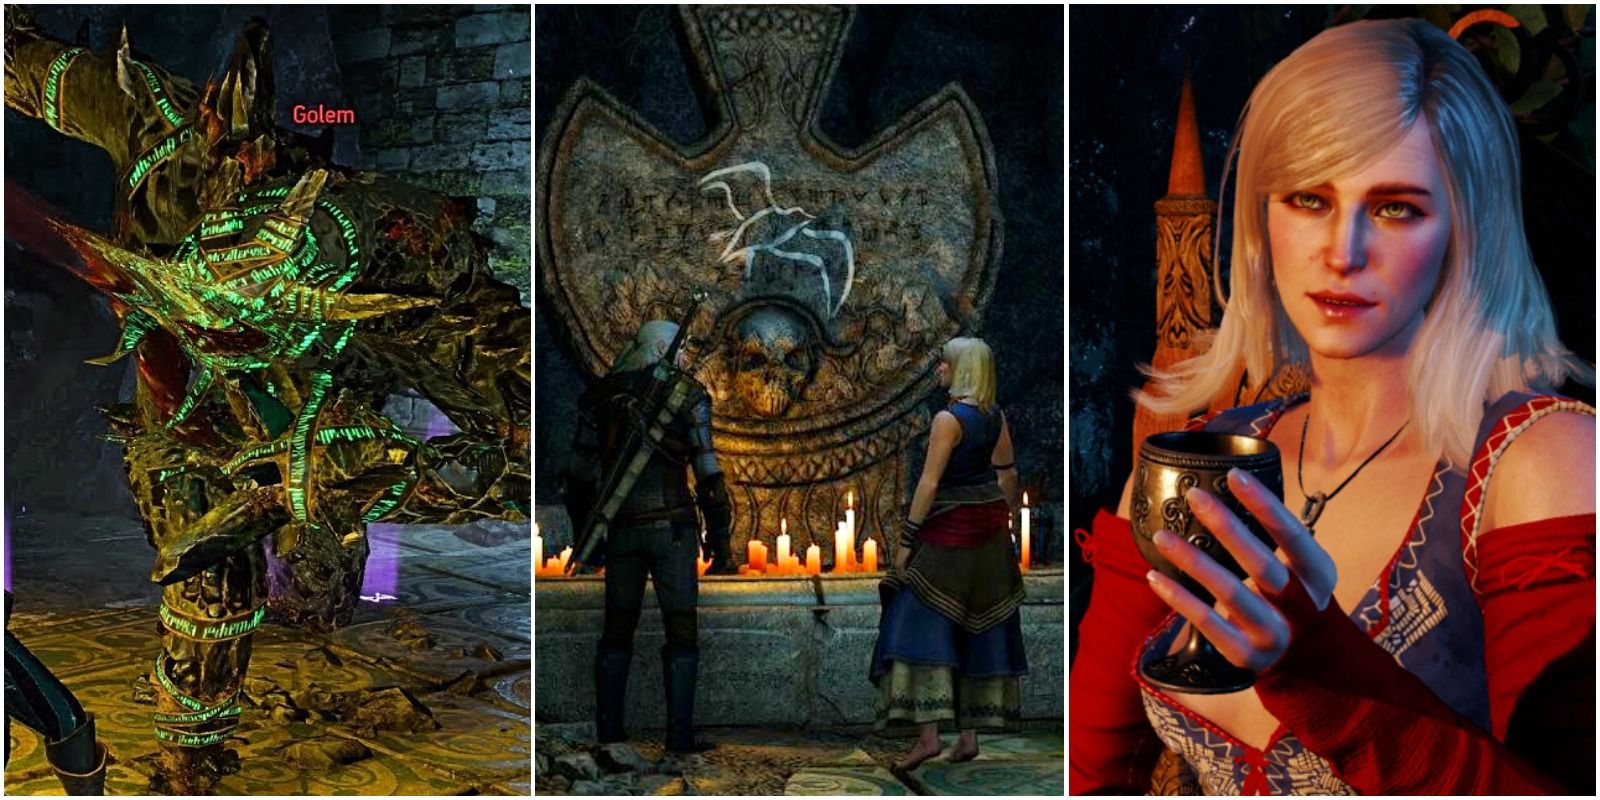 a golem, a hidden room with geralt and keira, and keira metz with a goblet.